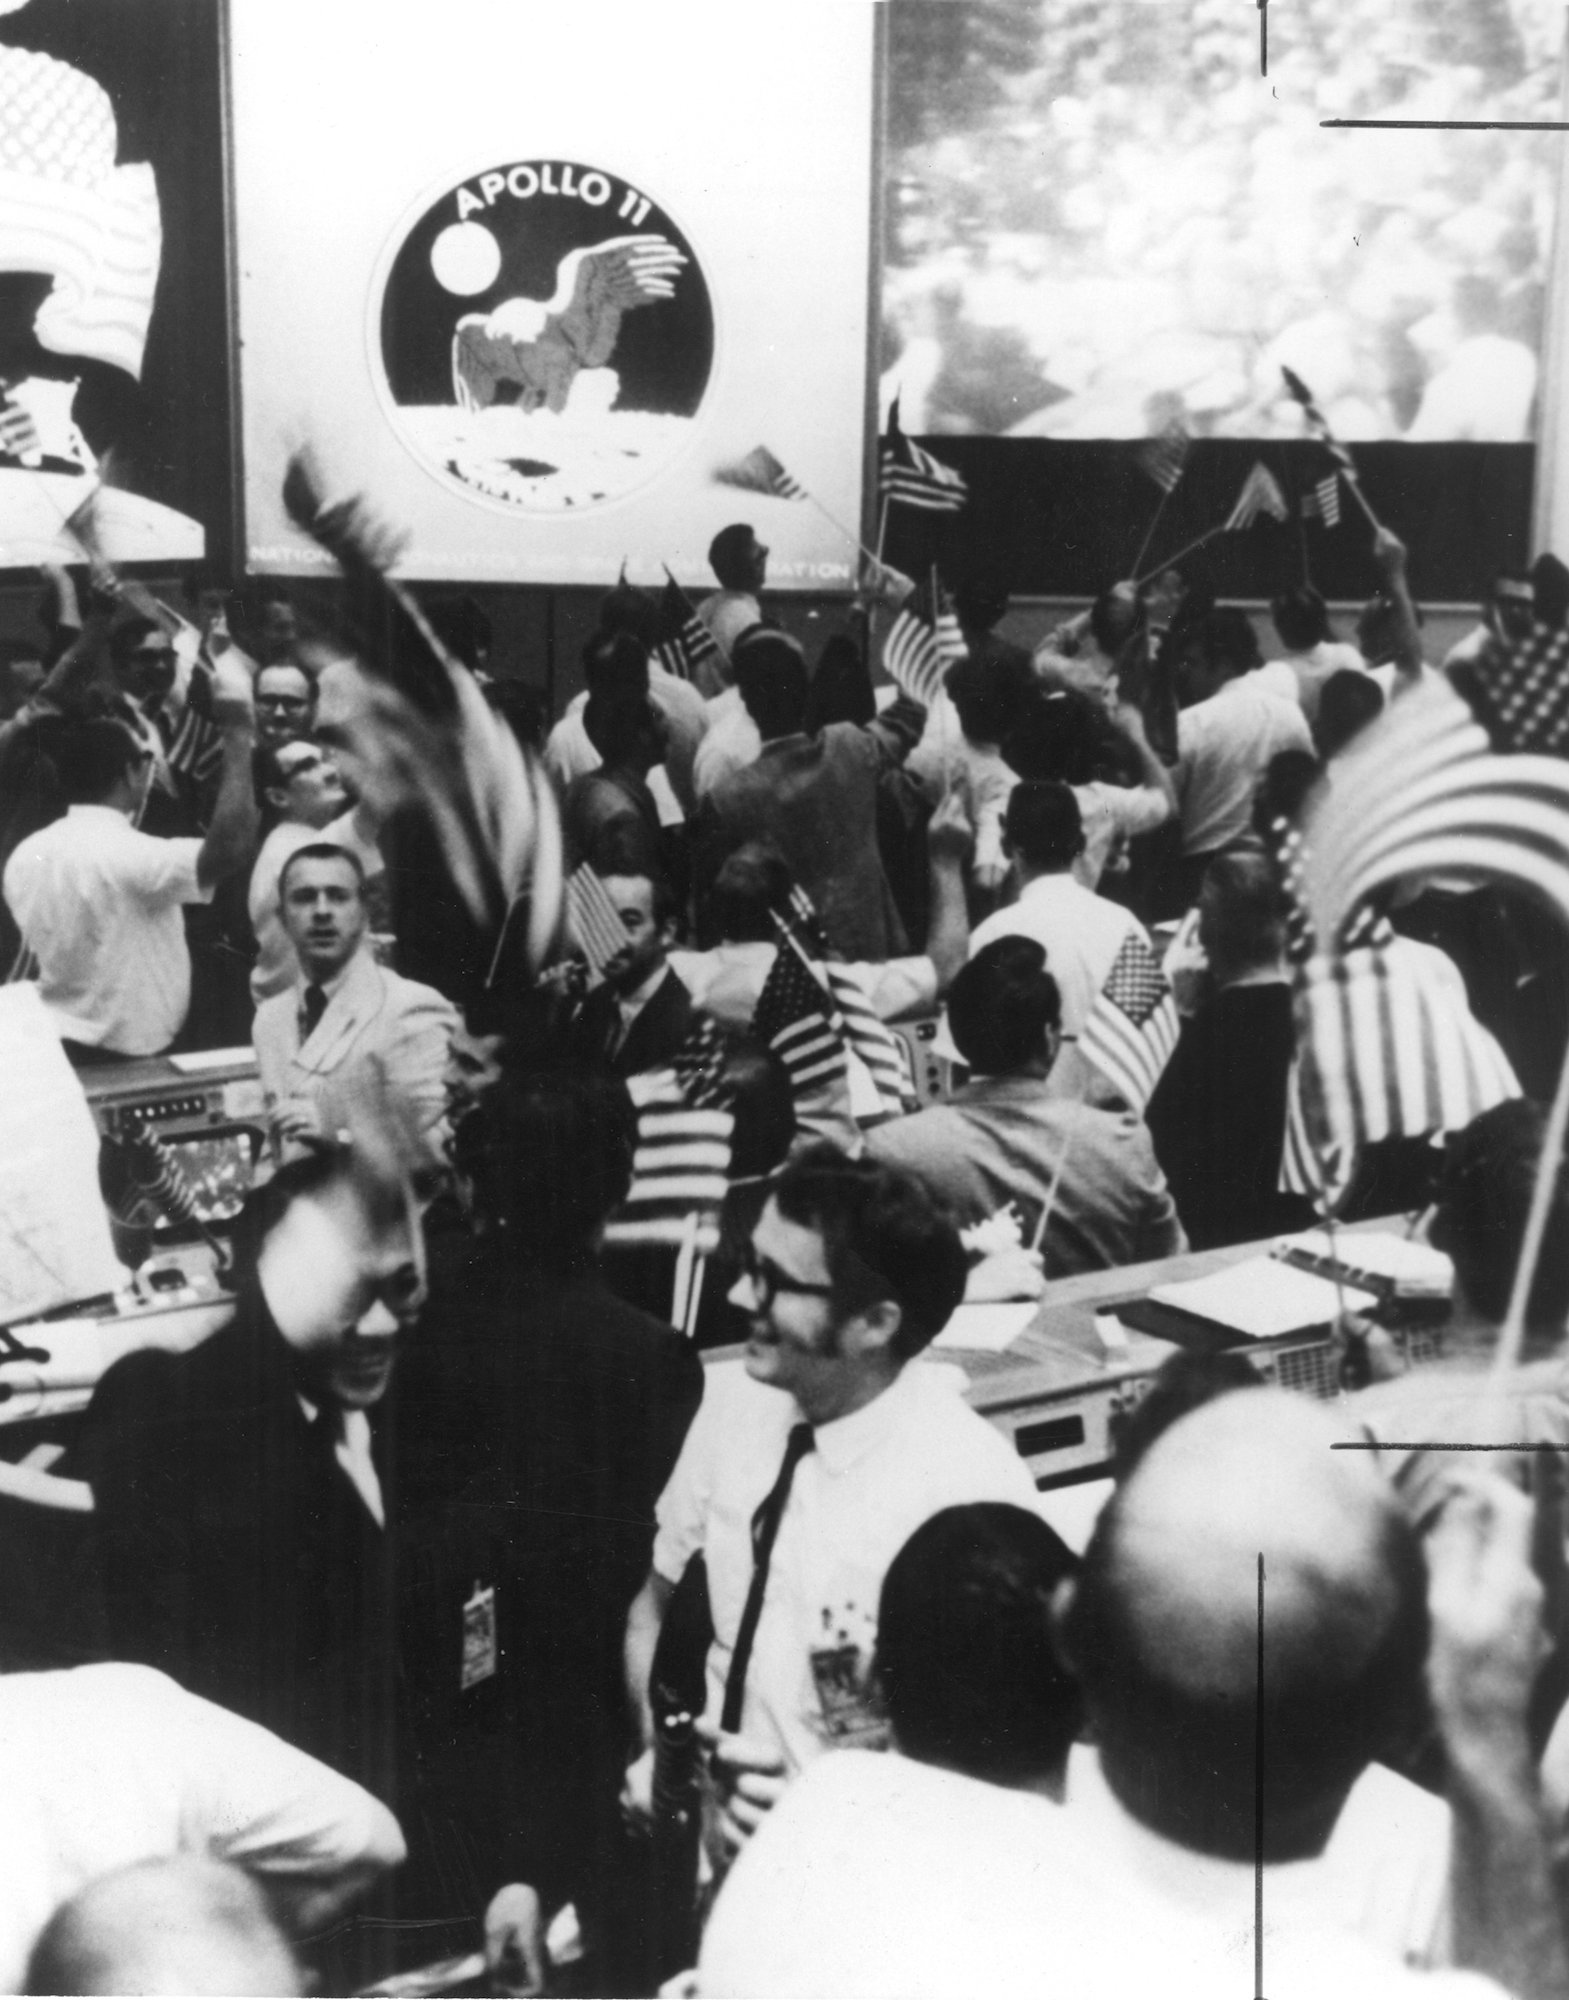 The Mission Operations Control Room in the Mission Control Center at the NASA Manned Spacecraft Center celebrates the success of Apollo 11